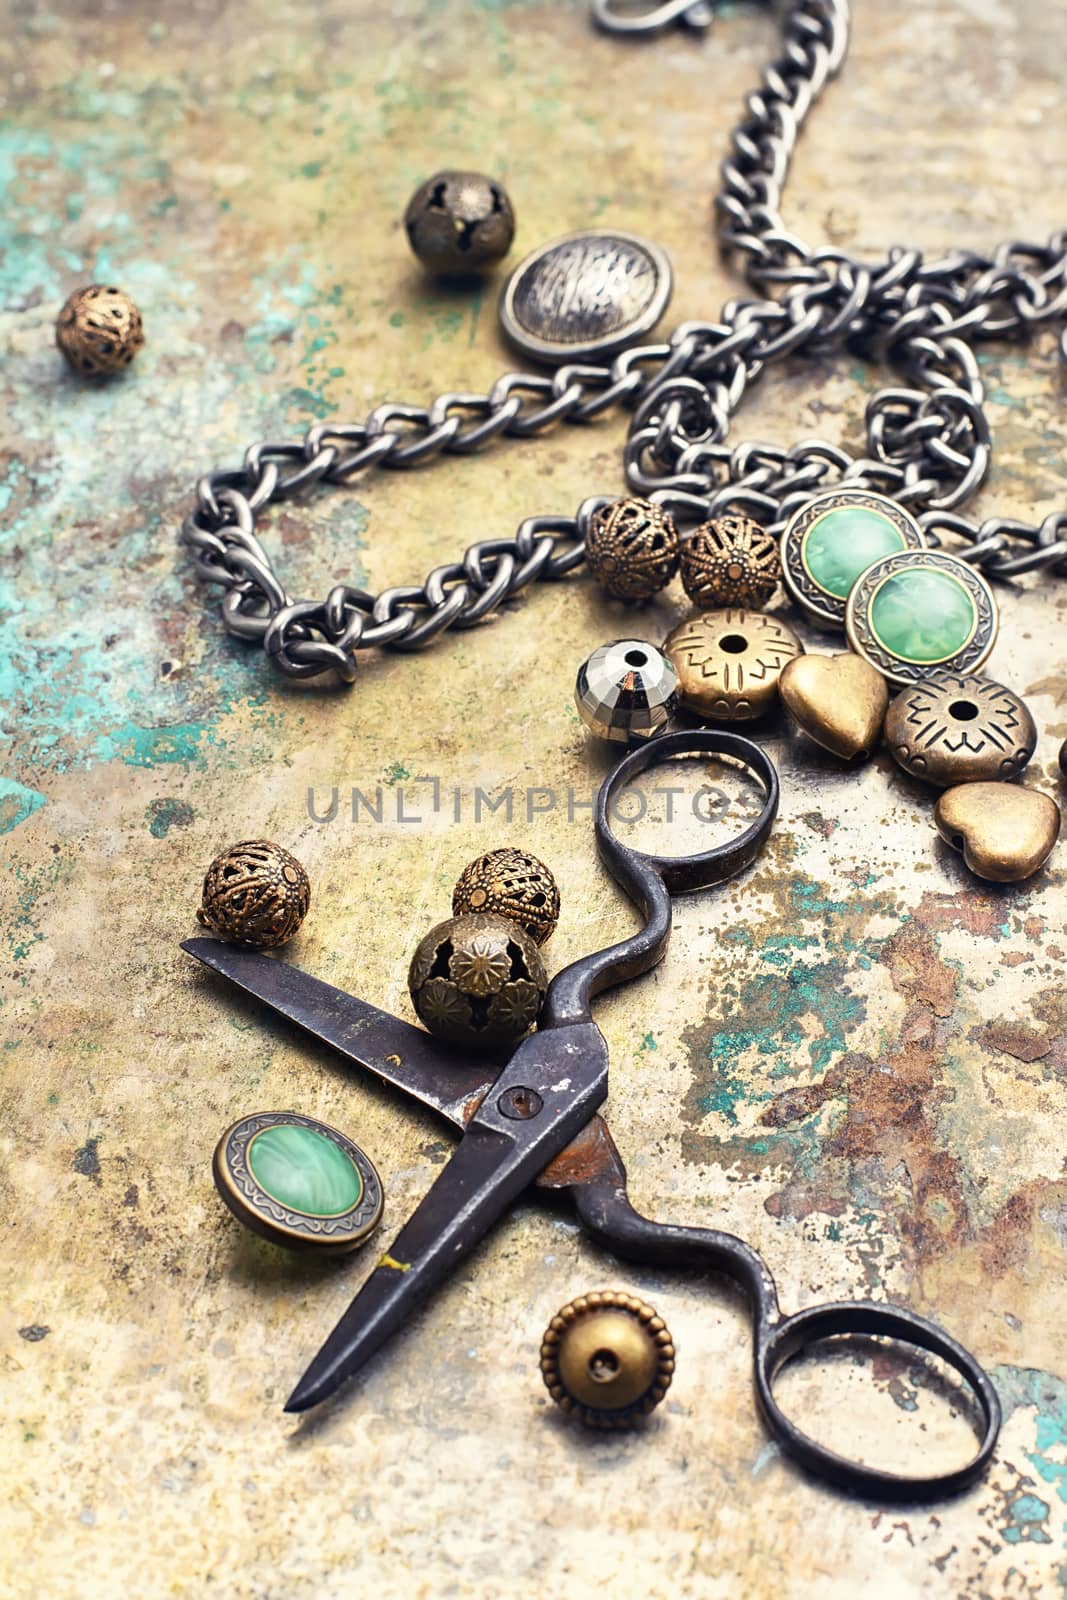 Metal beads,buttons,chain and scissors on retro background